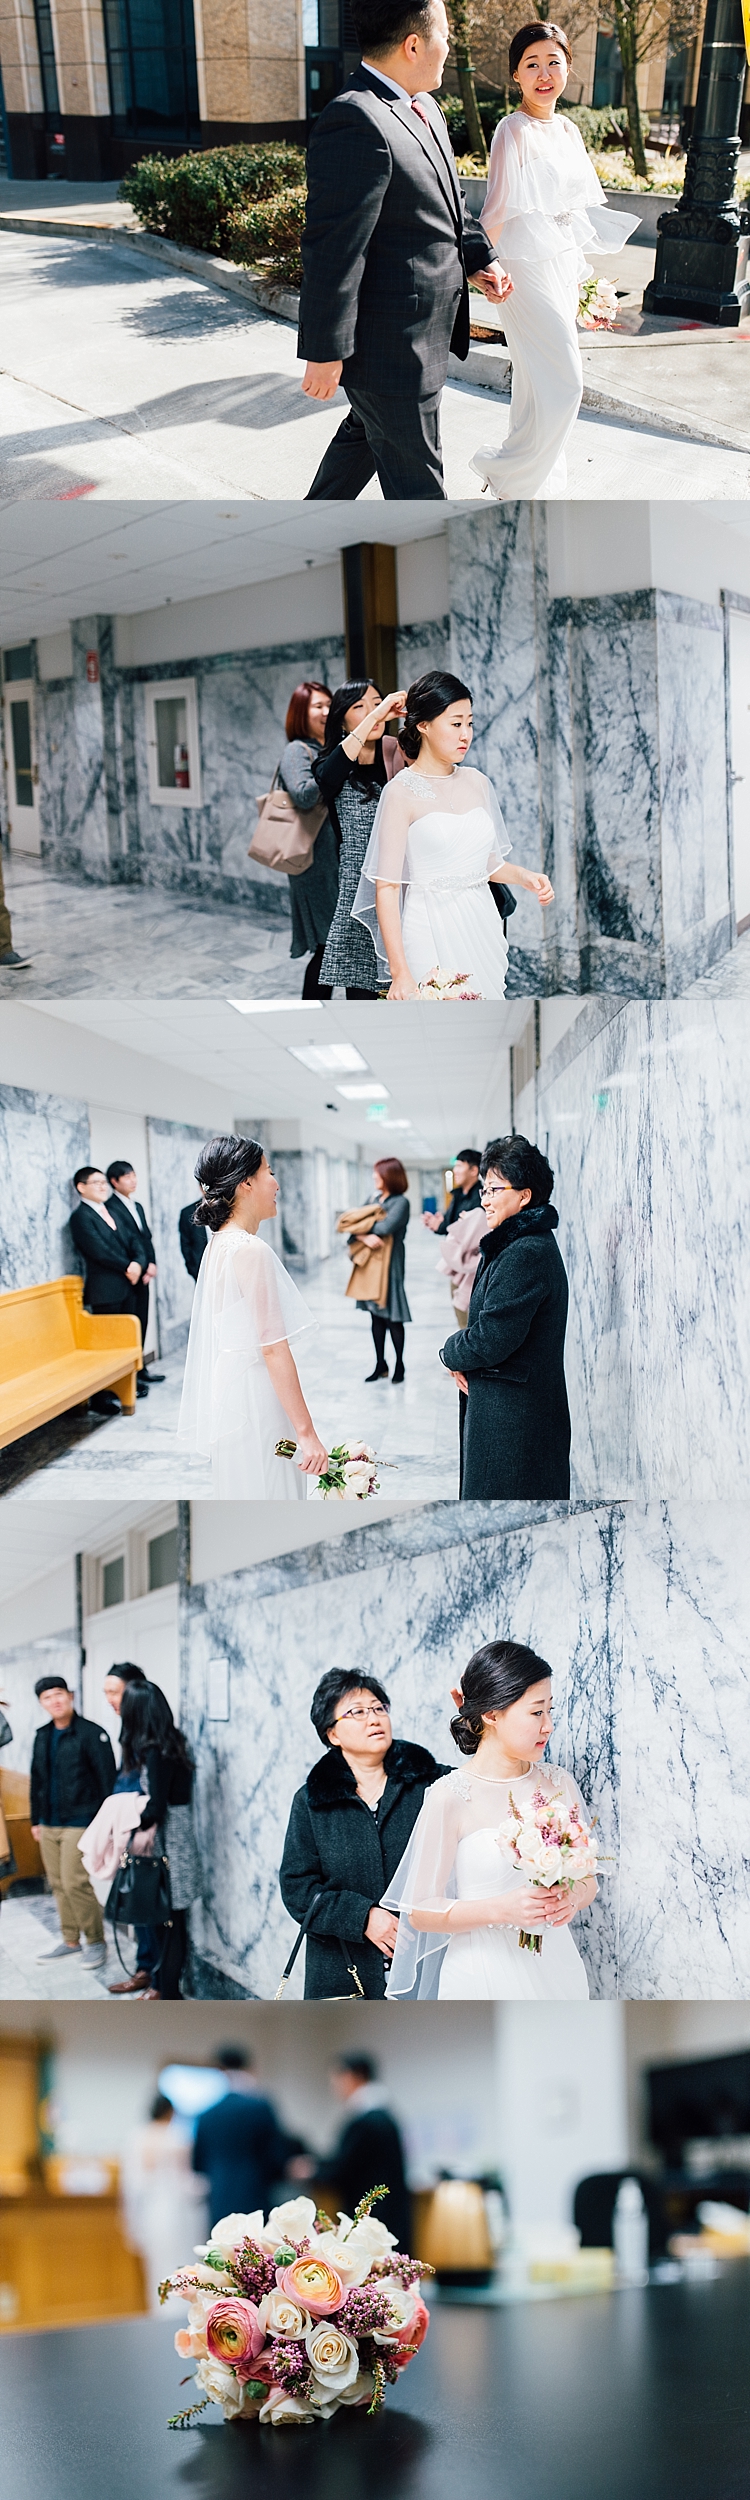 Seattle Courthouse Wedding Photographer PNW elopement Photography - Annie & Alan - Ashley Vos Photography-8.jpg